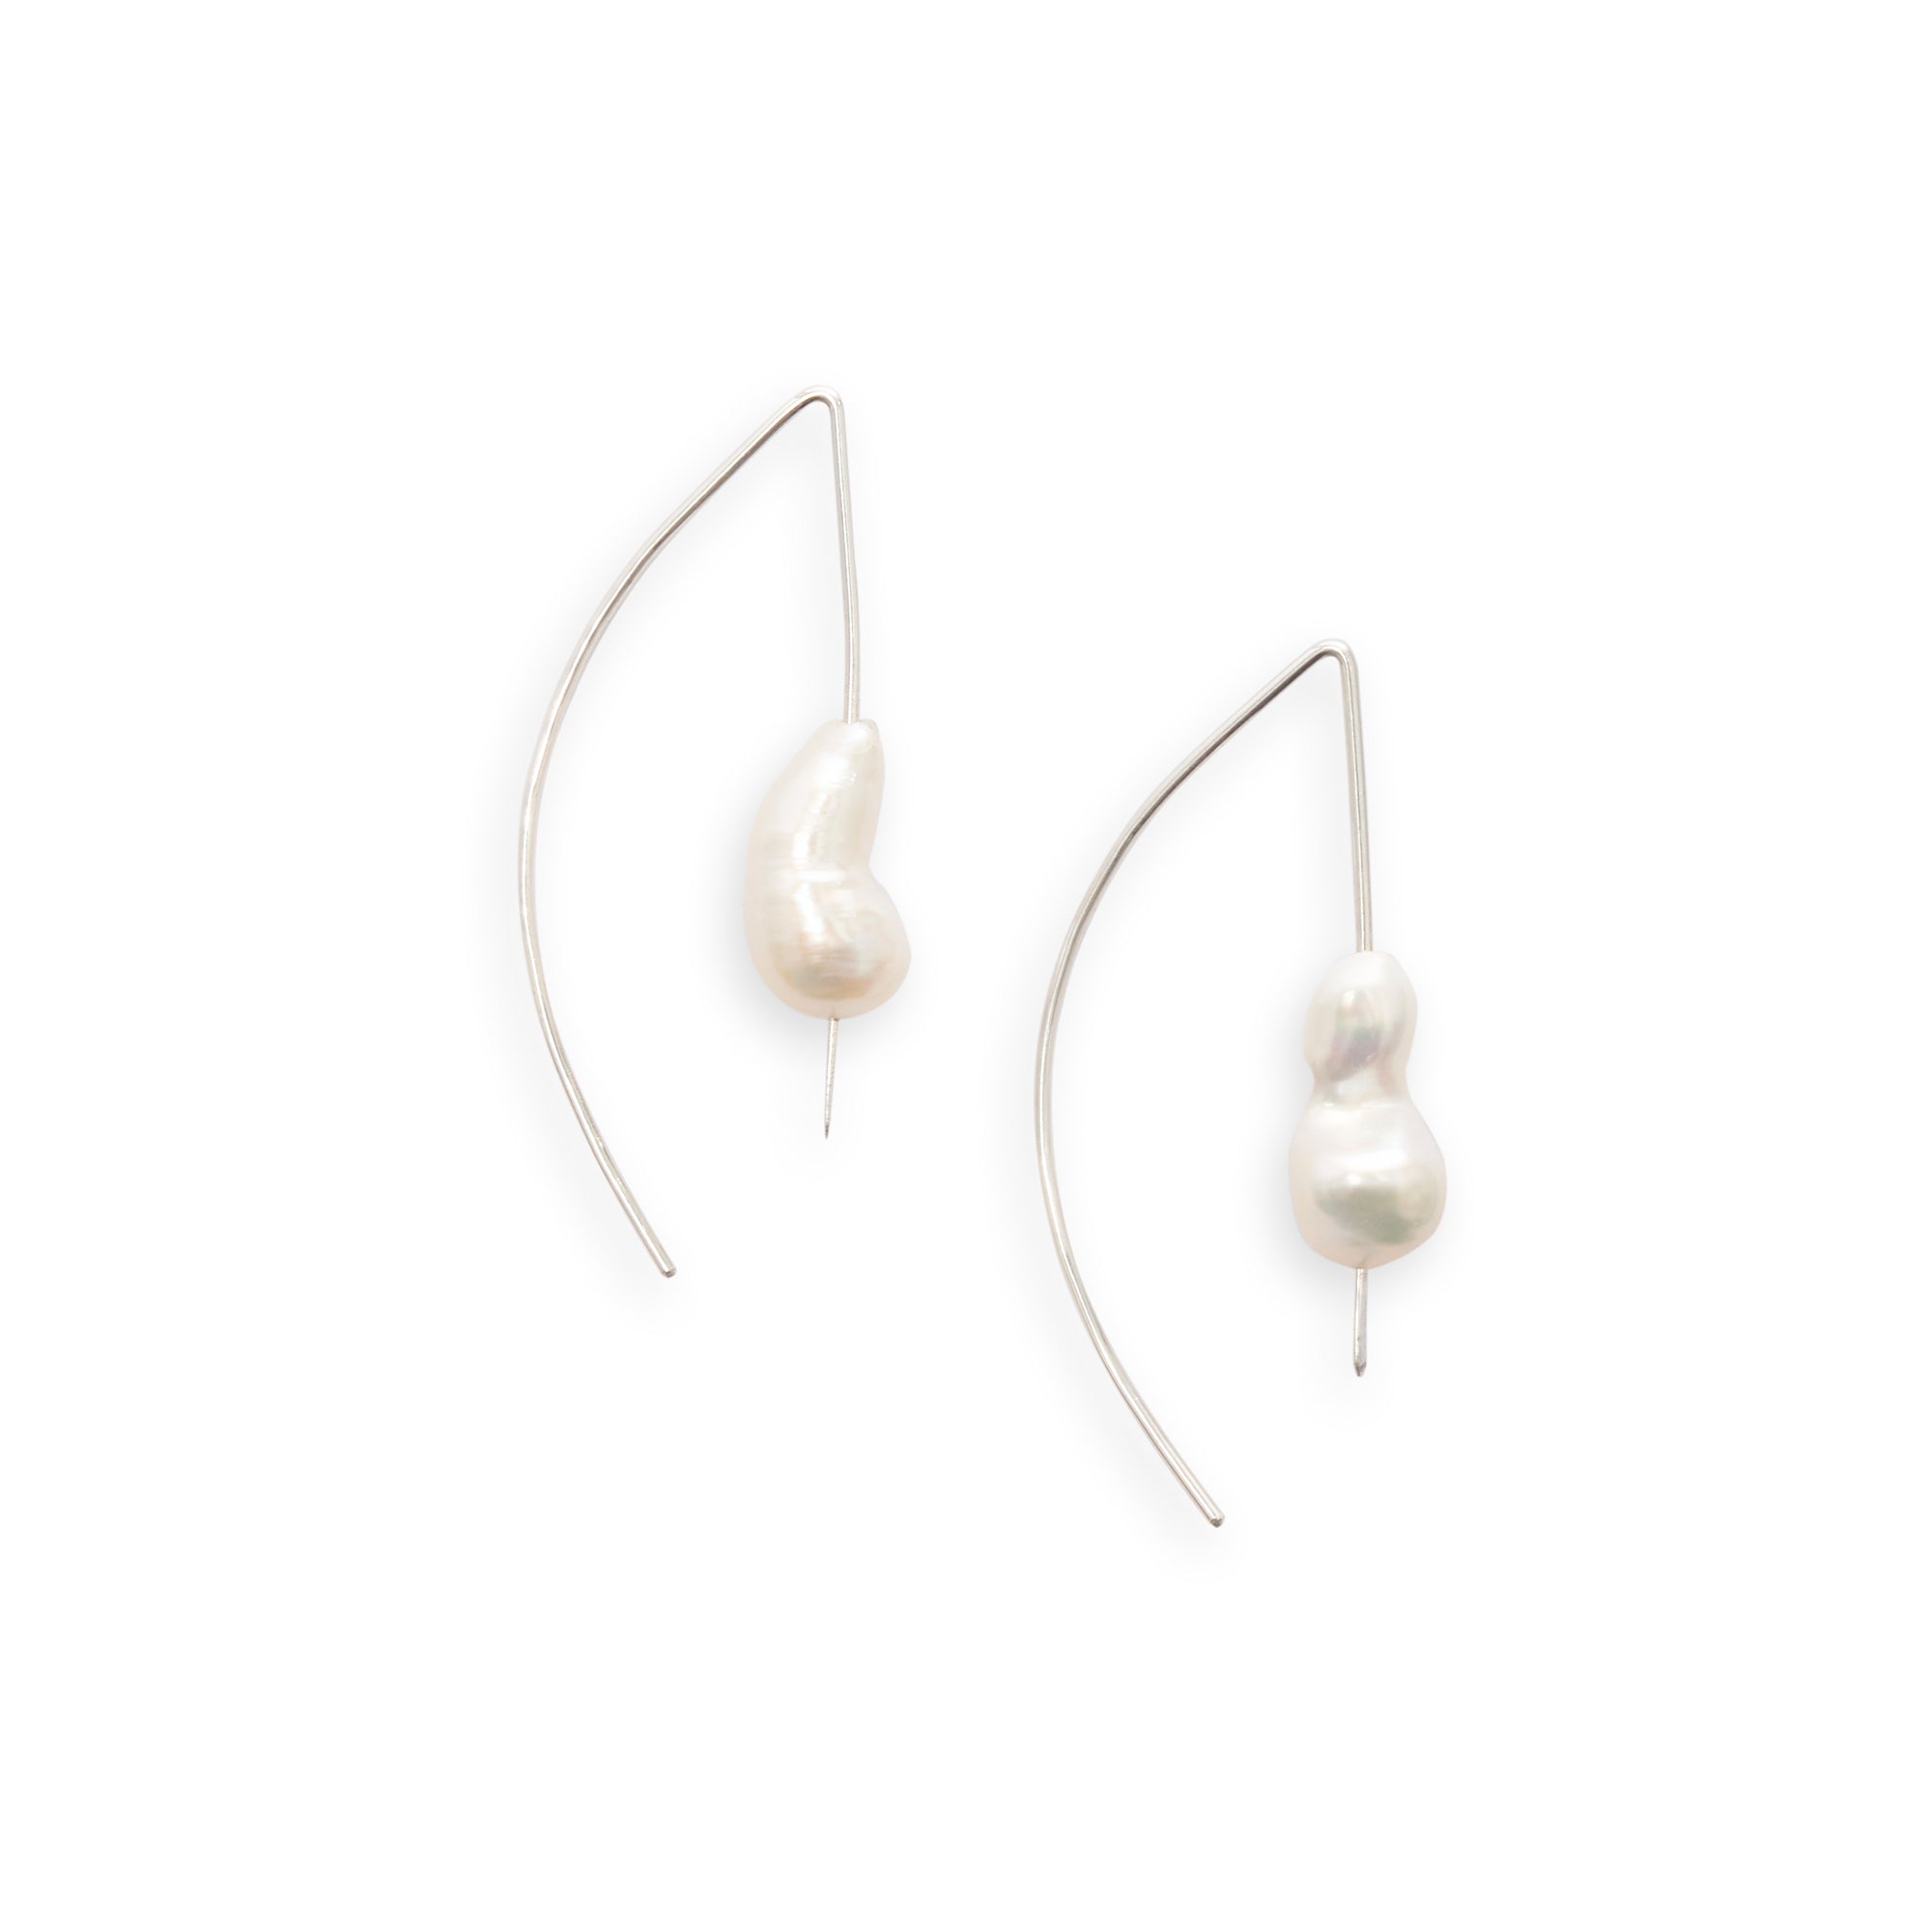 A modern threader earring with drops of Keshi pearls to add an element of classic elegance.   